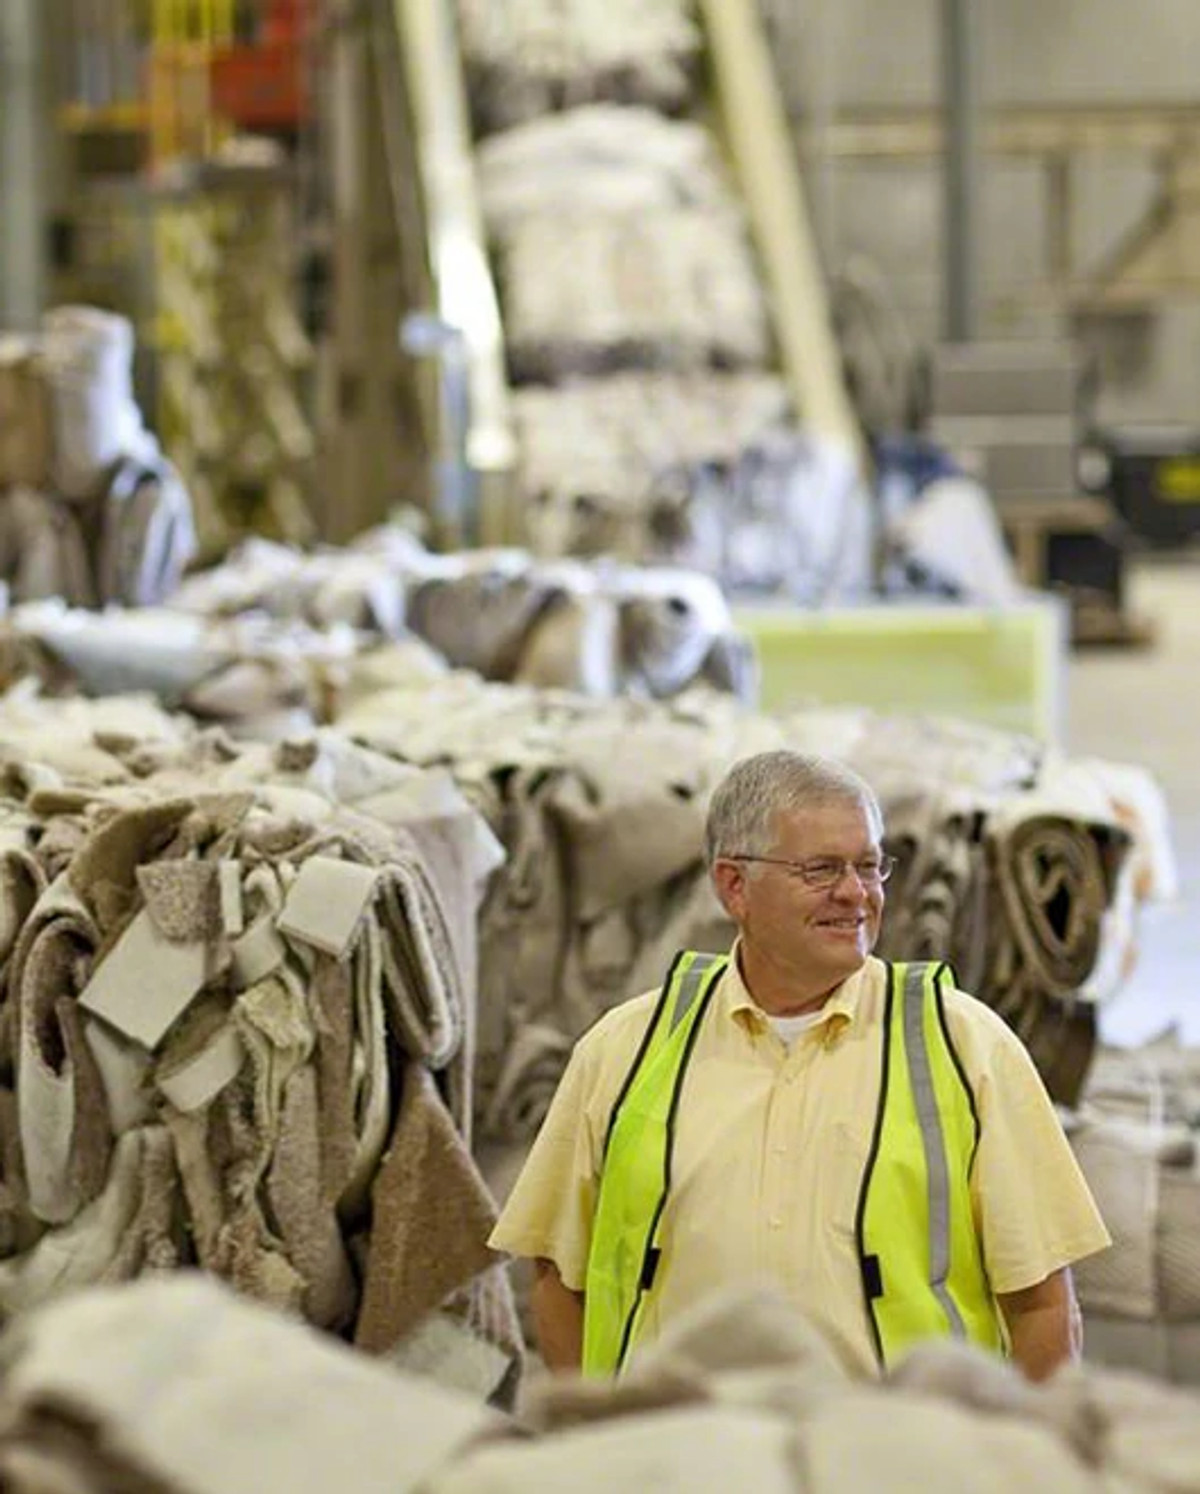 Worker reviewing carpet collected to be recycled